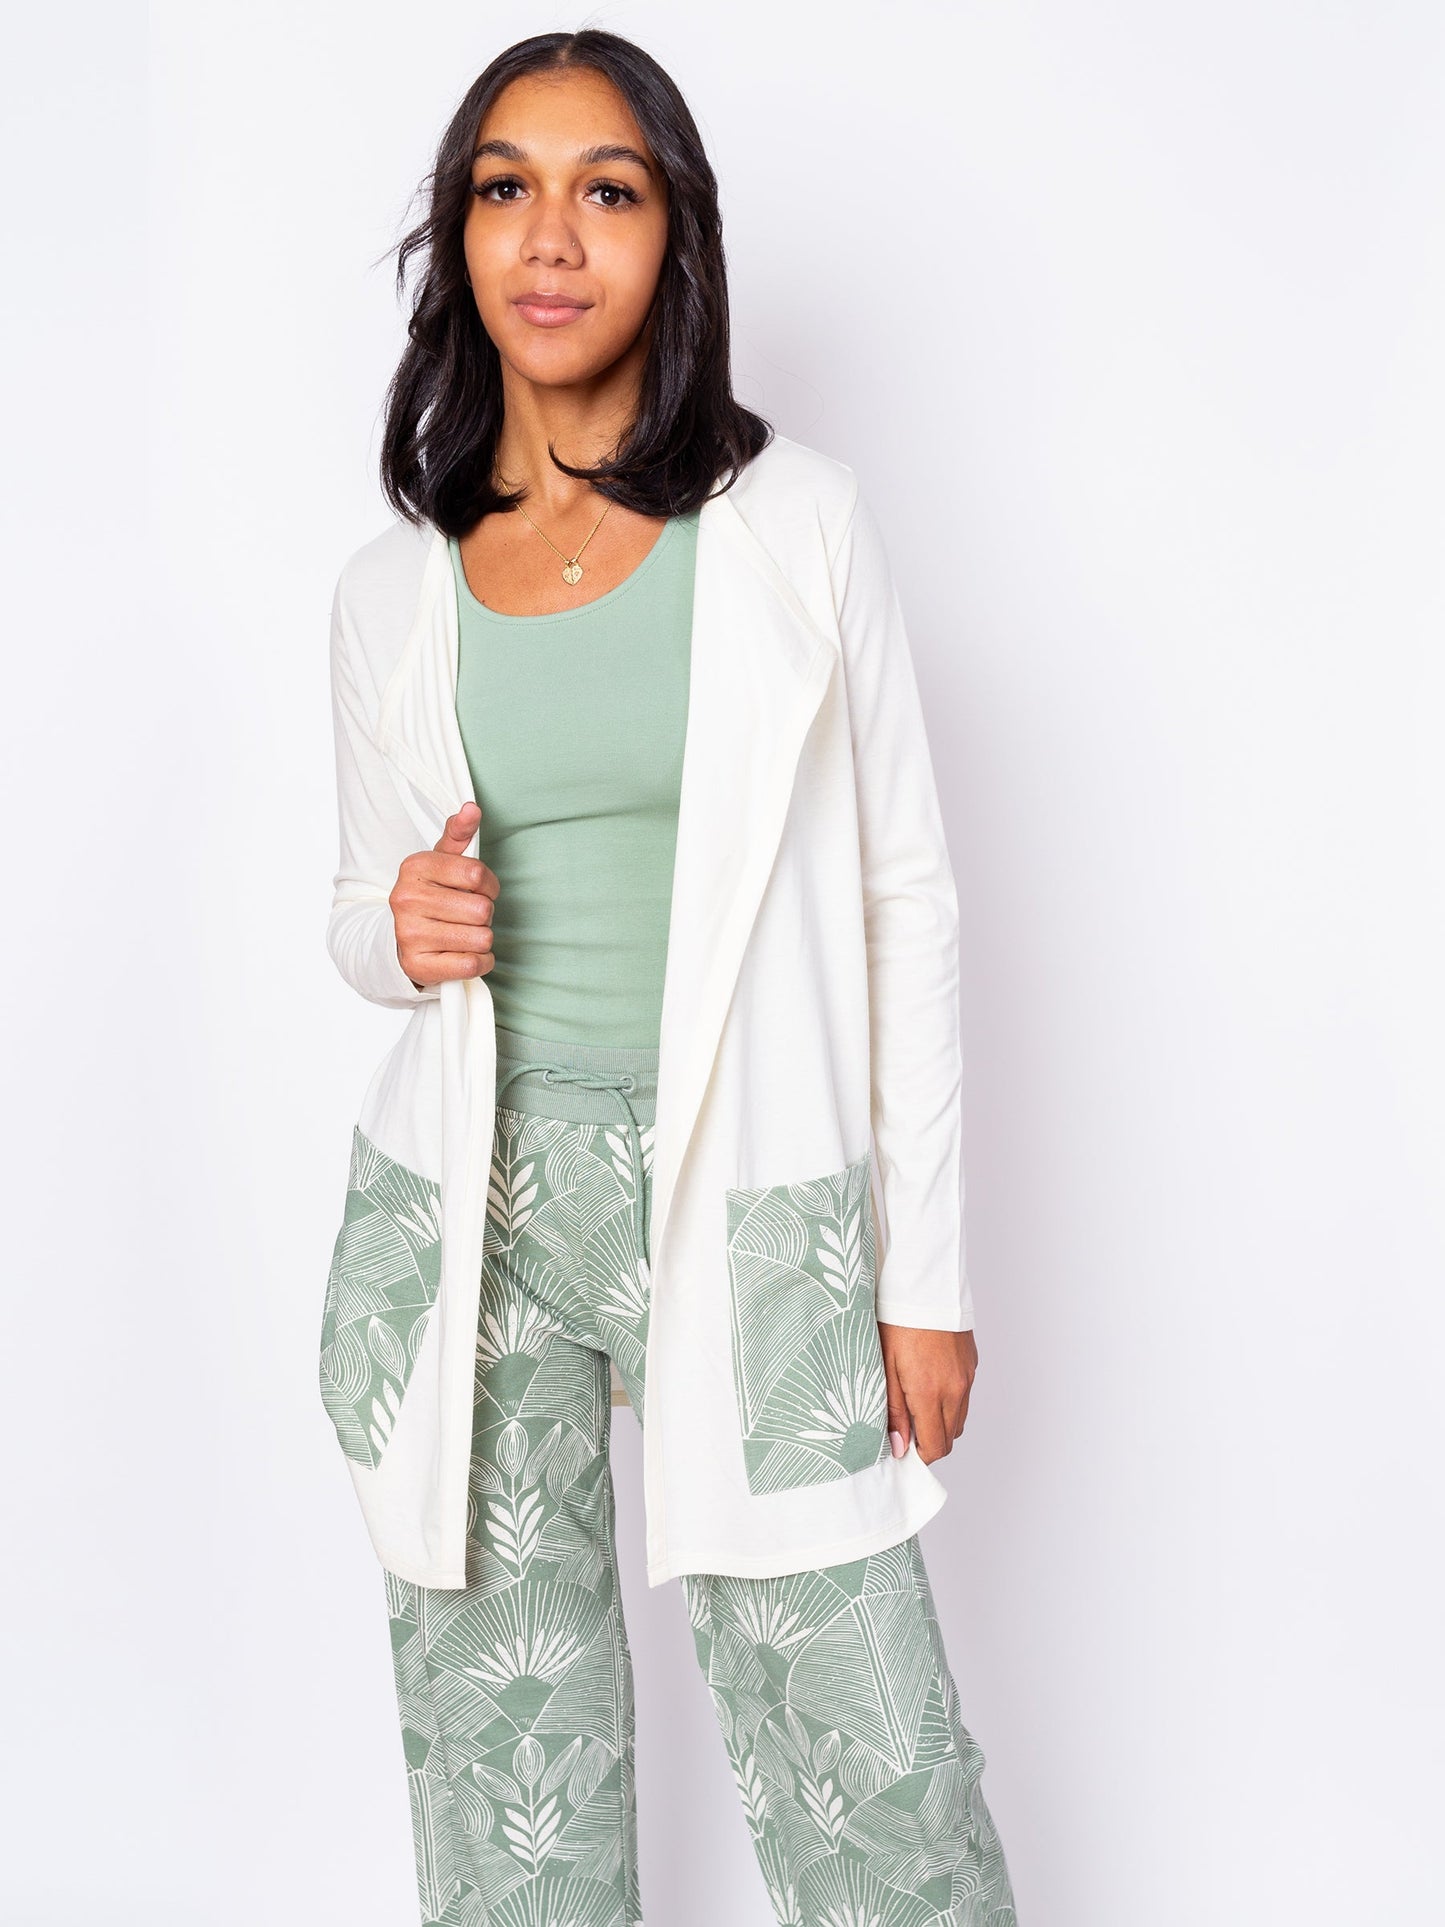 Deco Frond Cardigan by Happy Earth